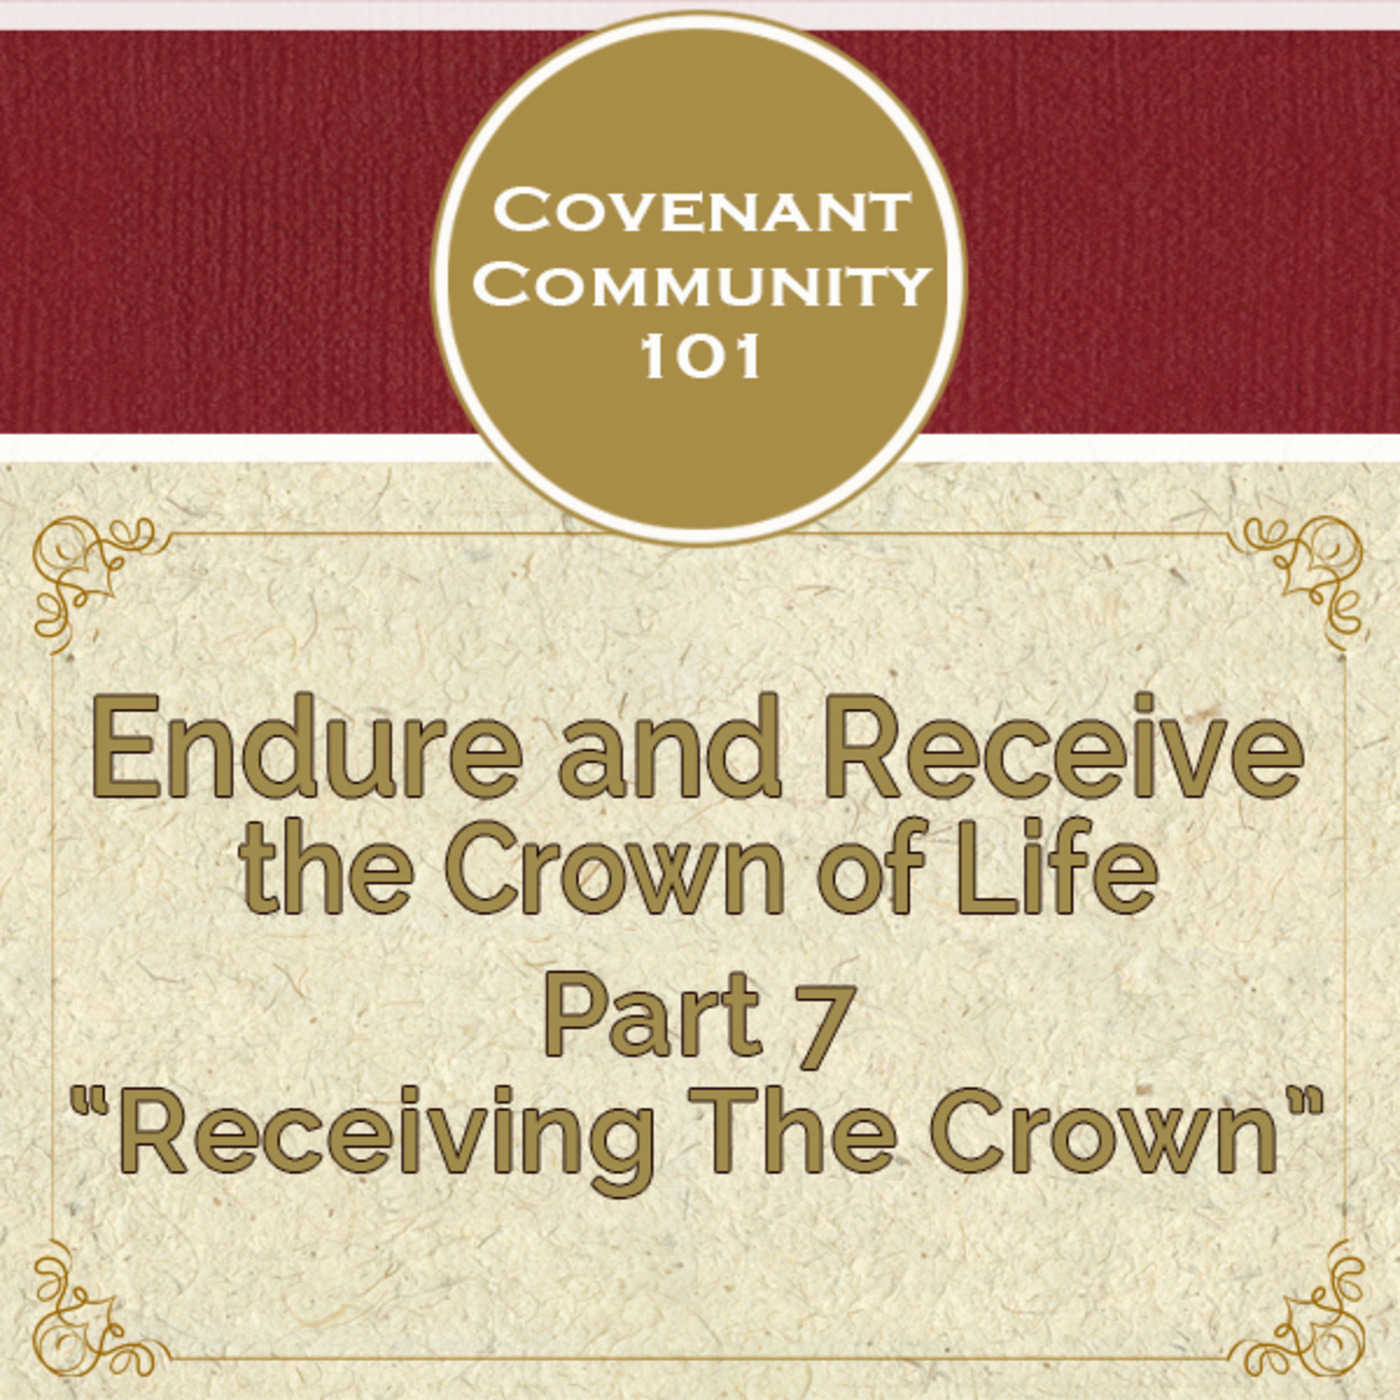 Covenant Community 101: Endure and Receive the Crown of Life - Part 7 “Receiving The Crown”